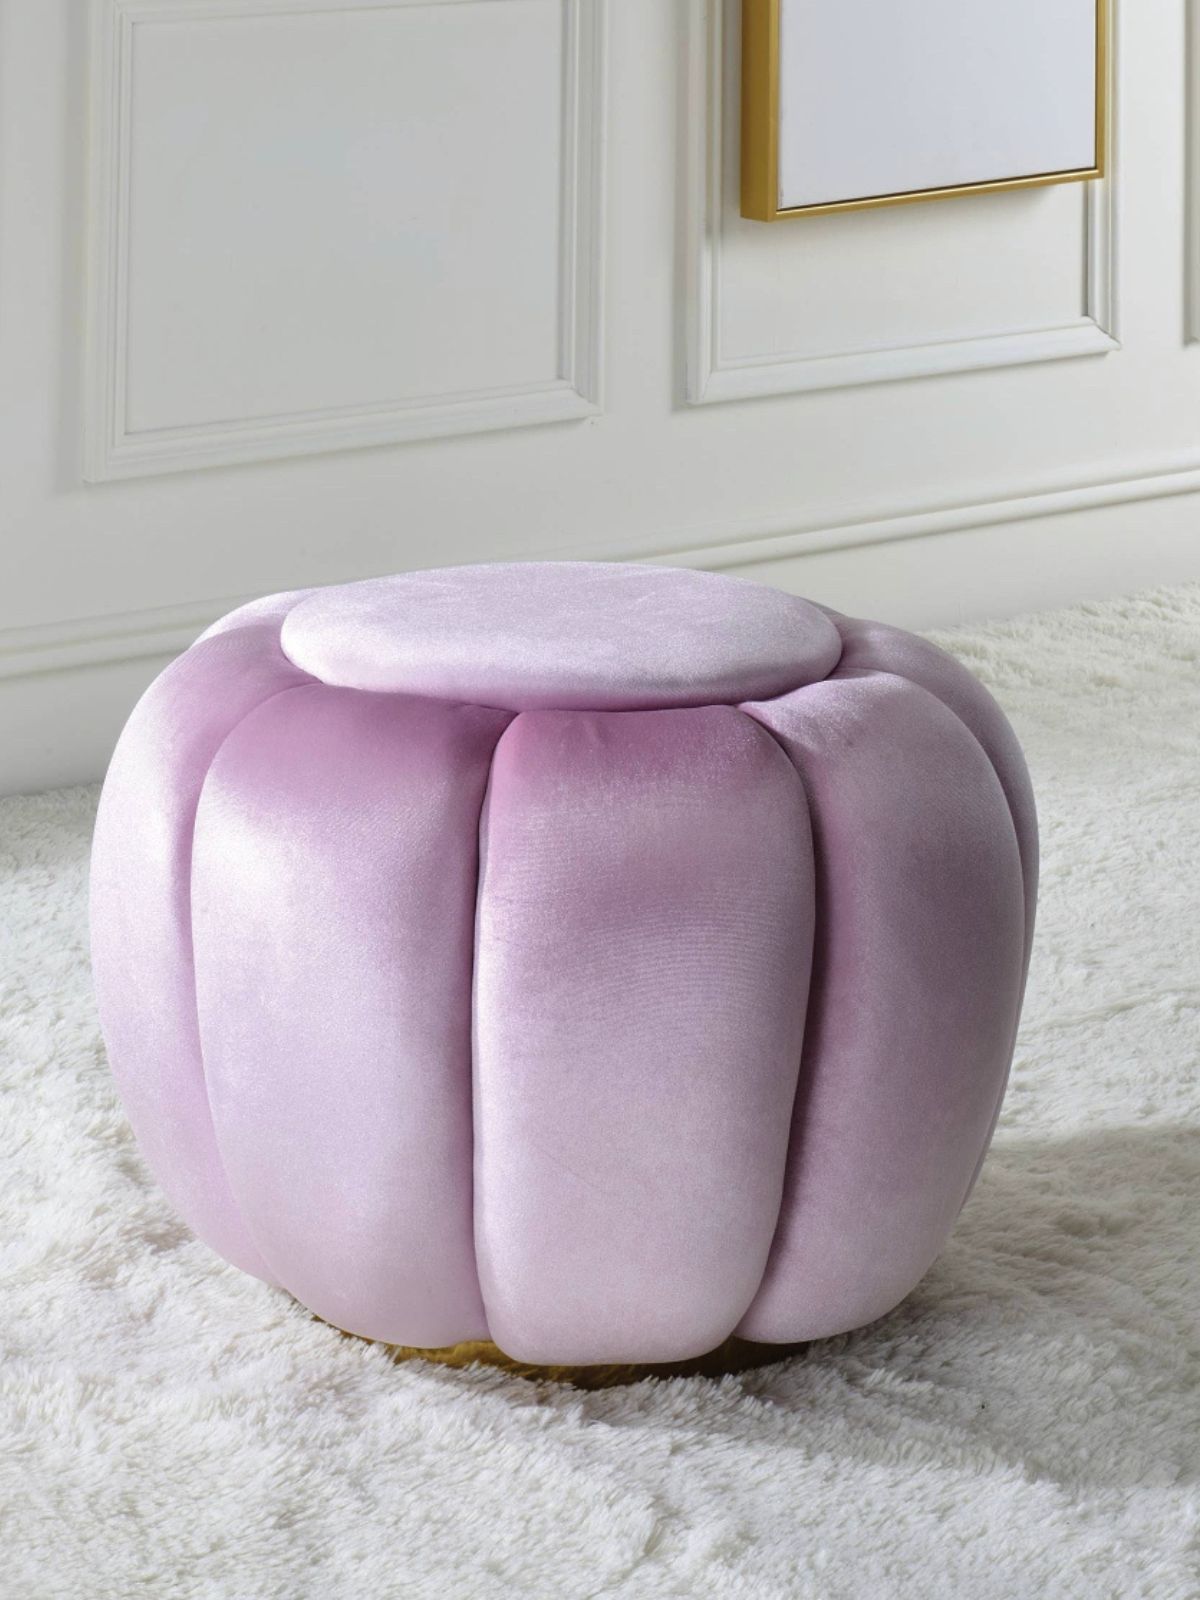 This Heiress ottoman is fully padded with sapphire bubblegum pink velvet & has a metal round base in a gold finish. This design will go well with any home décor.